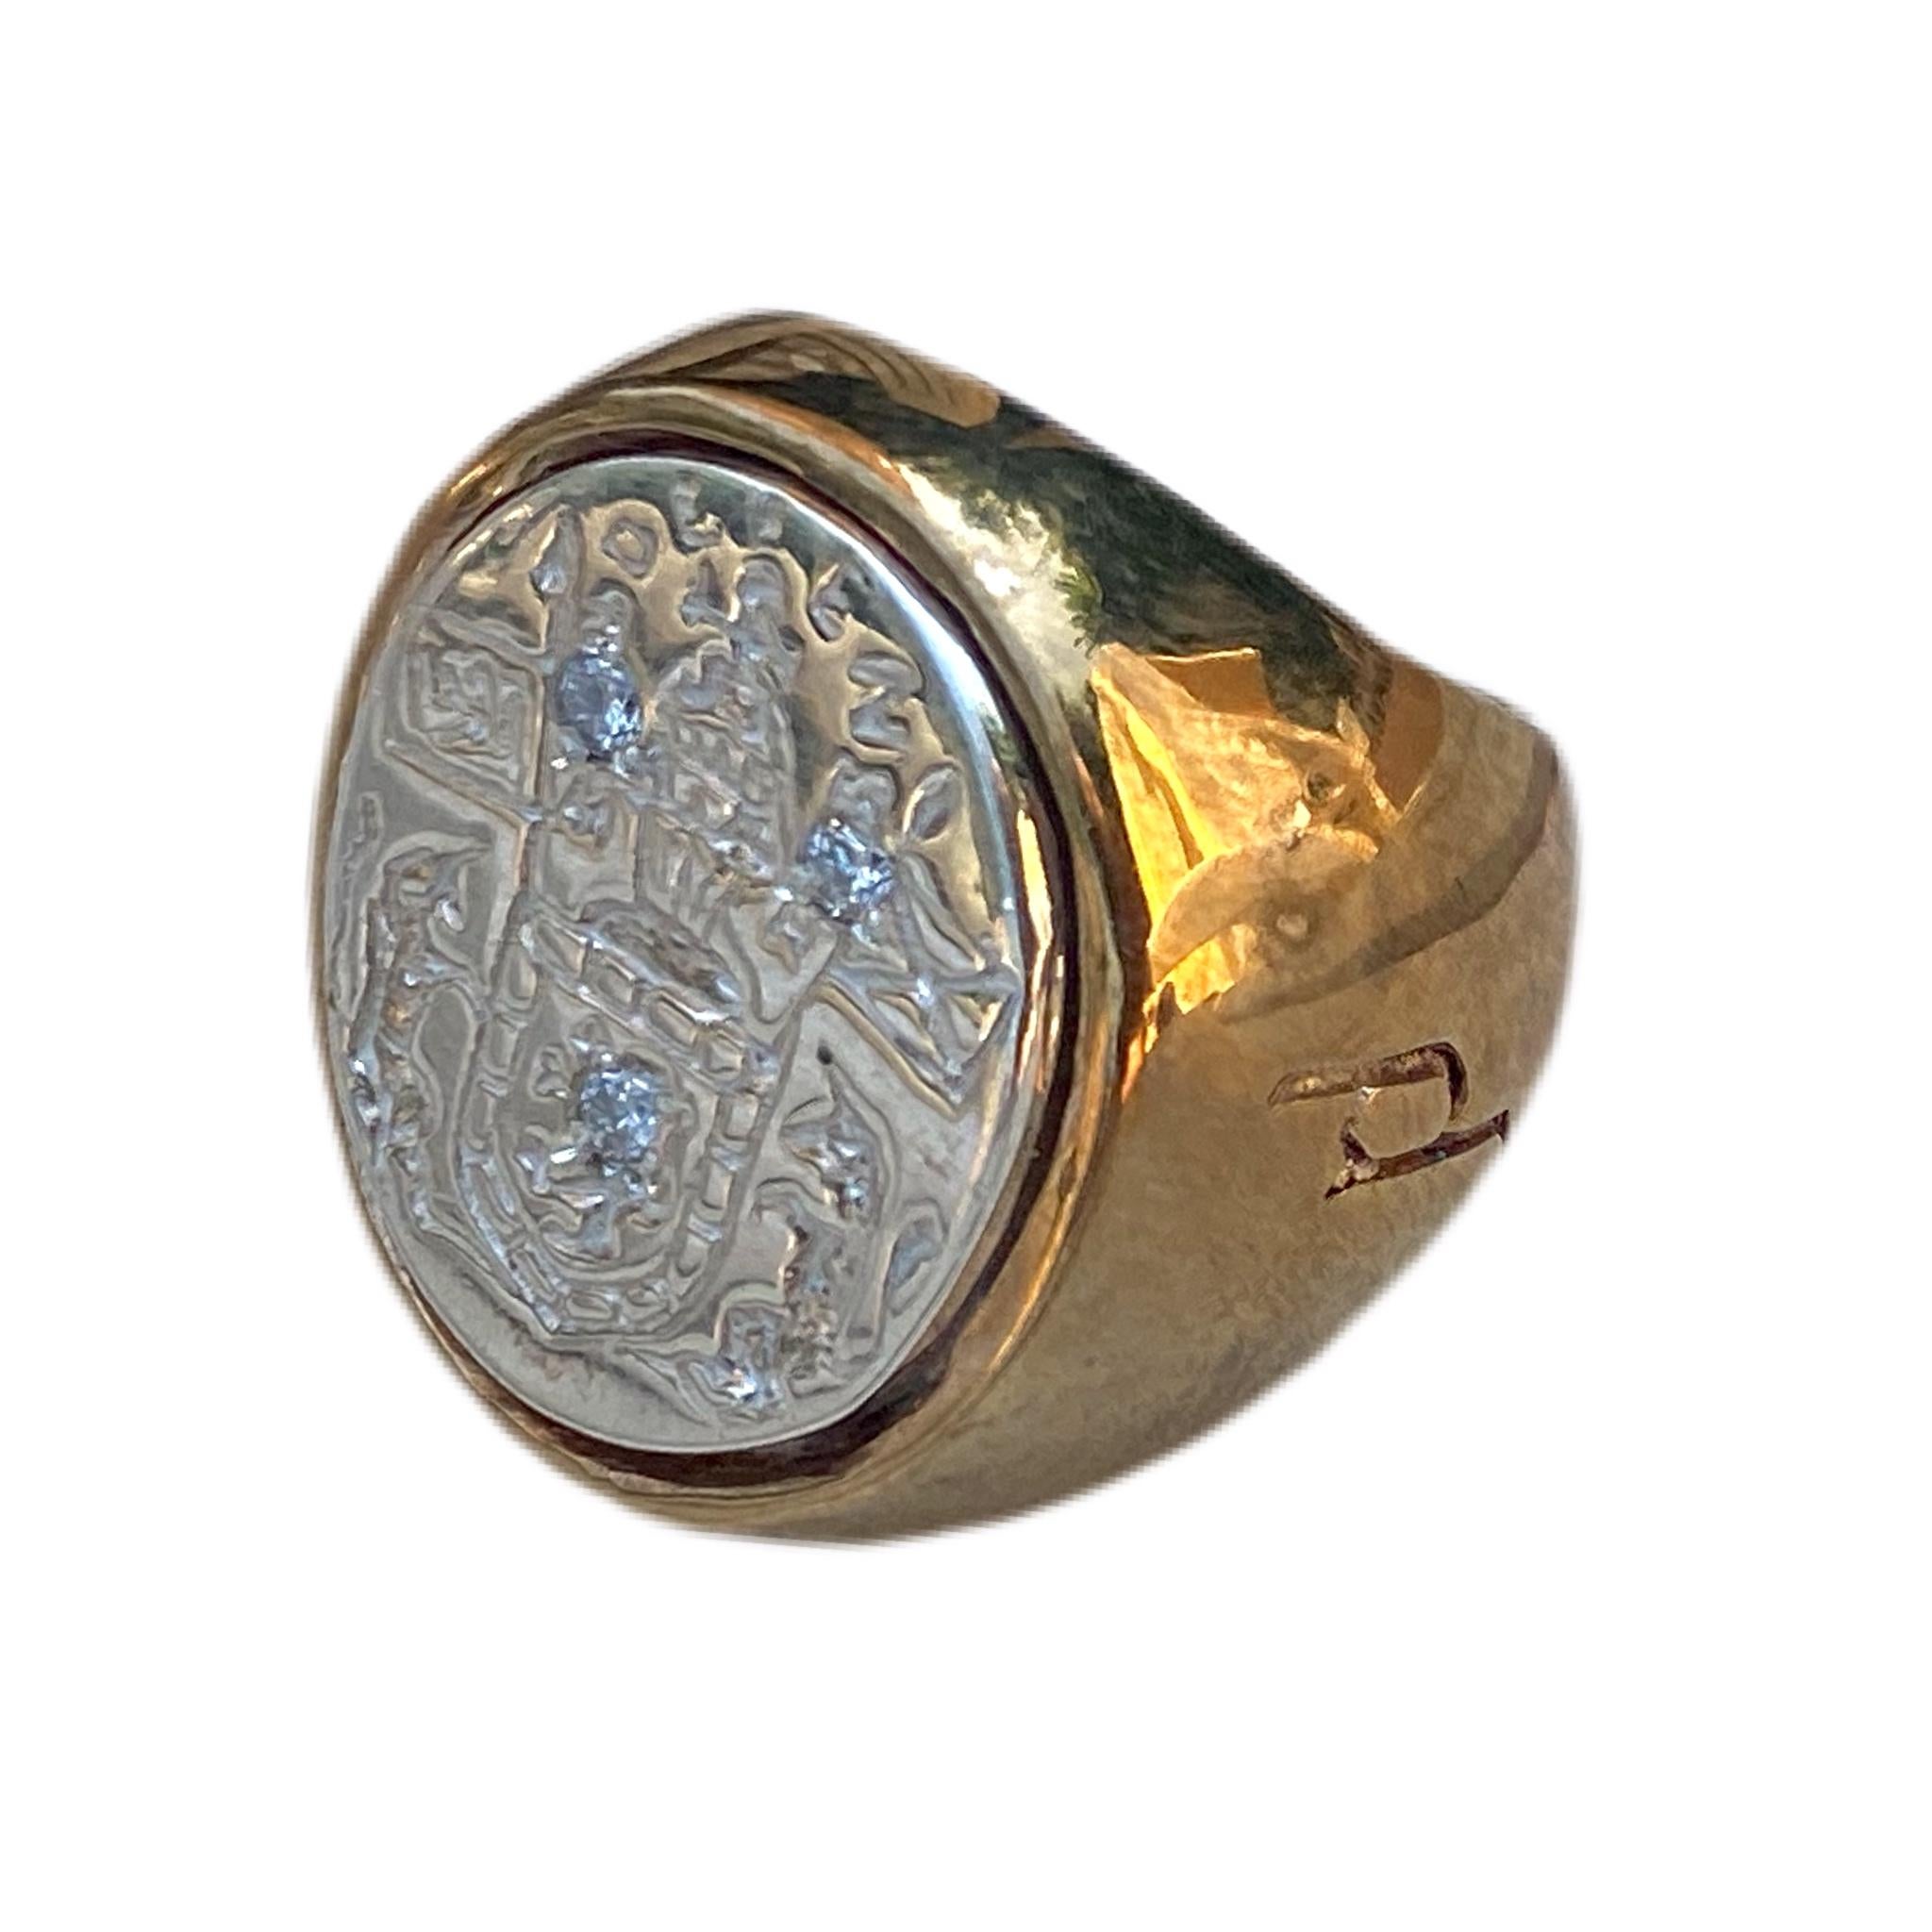 3 pcs Sapphire Crest Signet Ring Sterling Silver Bronze J Dauphin can be worn by women or men.

Inspired by Queen Mary of Scots ring. Gold signet-ring; engraved; shoulders ornamented with flowers and leaves. Oval bezel set with silver intaglio